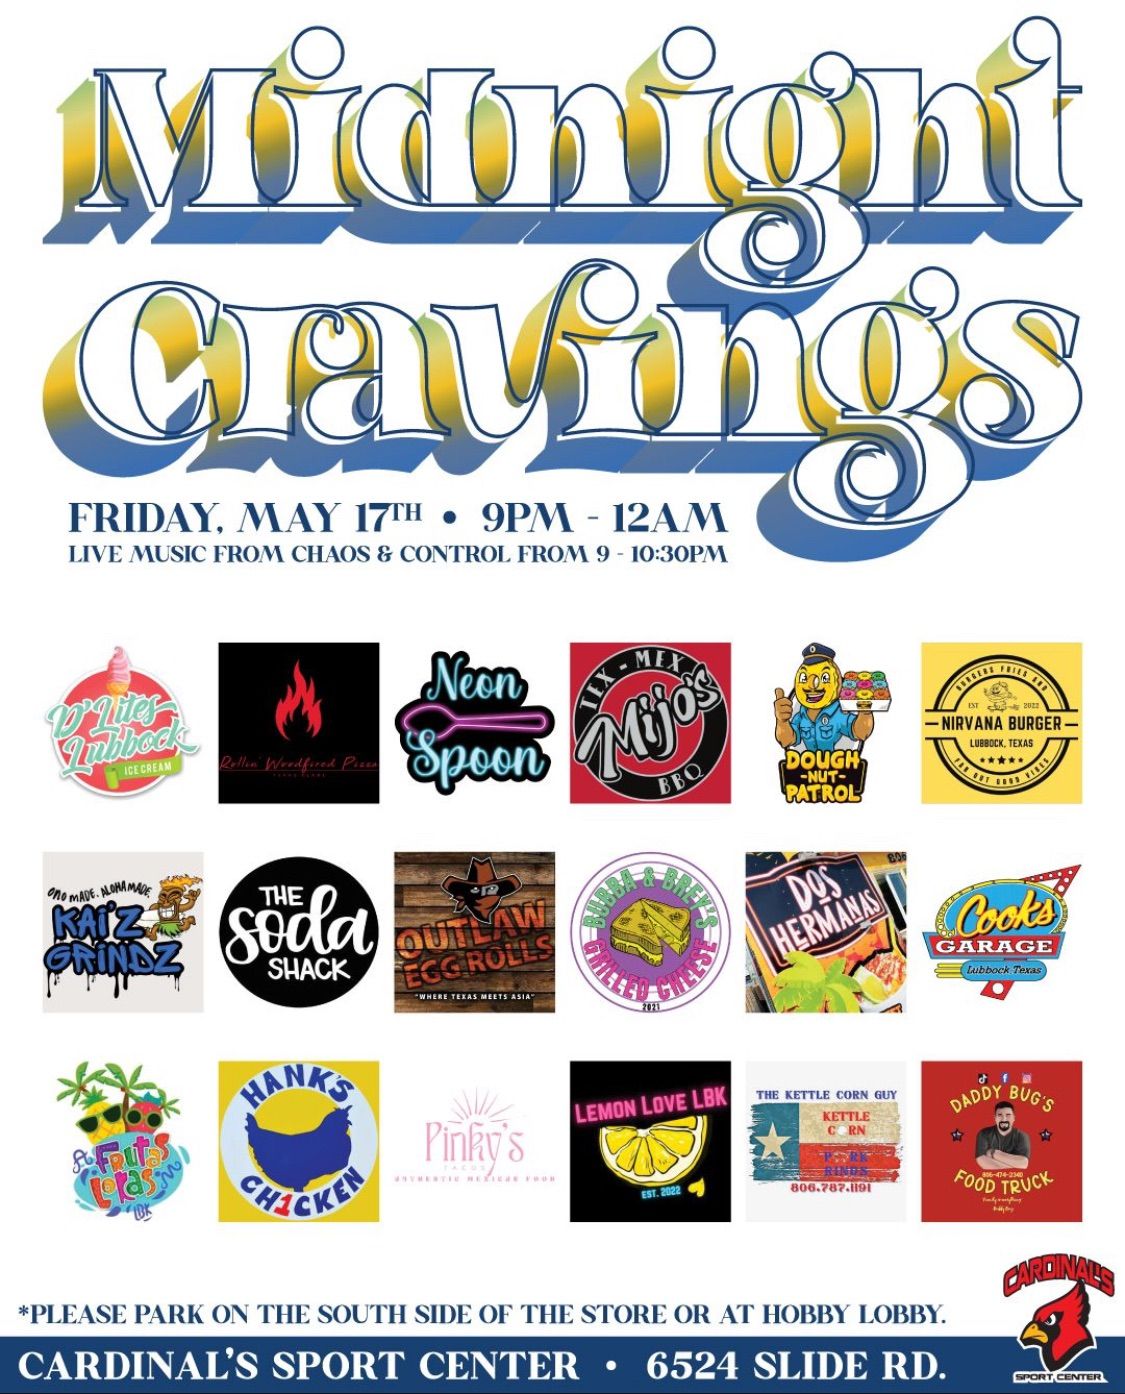 MIDNIGHT CRAVINGS (may 17th)